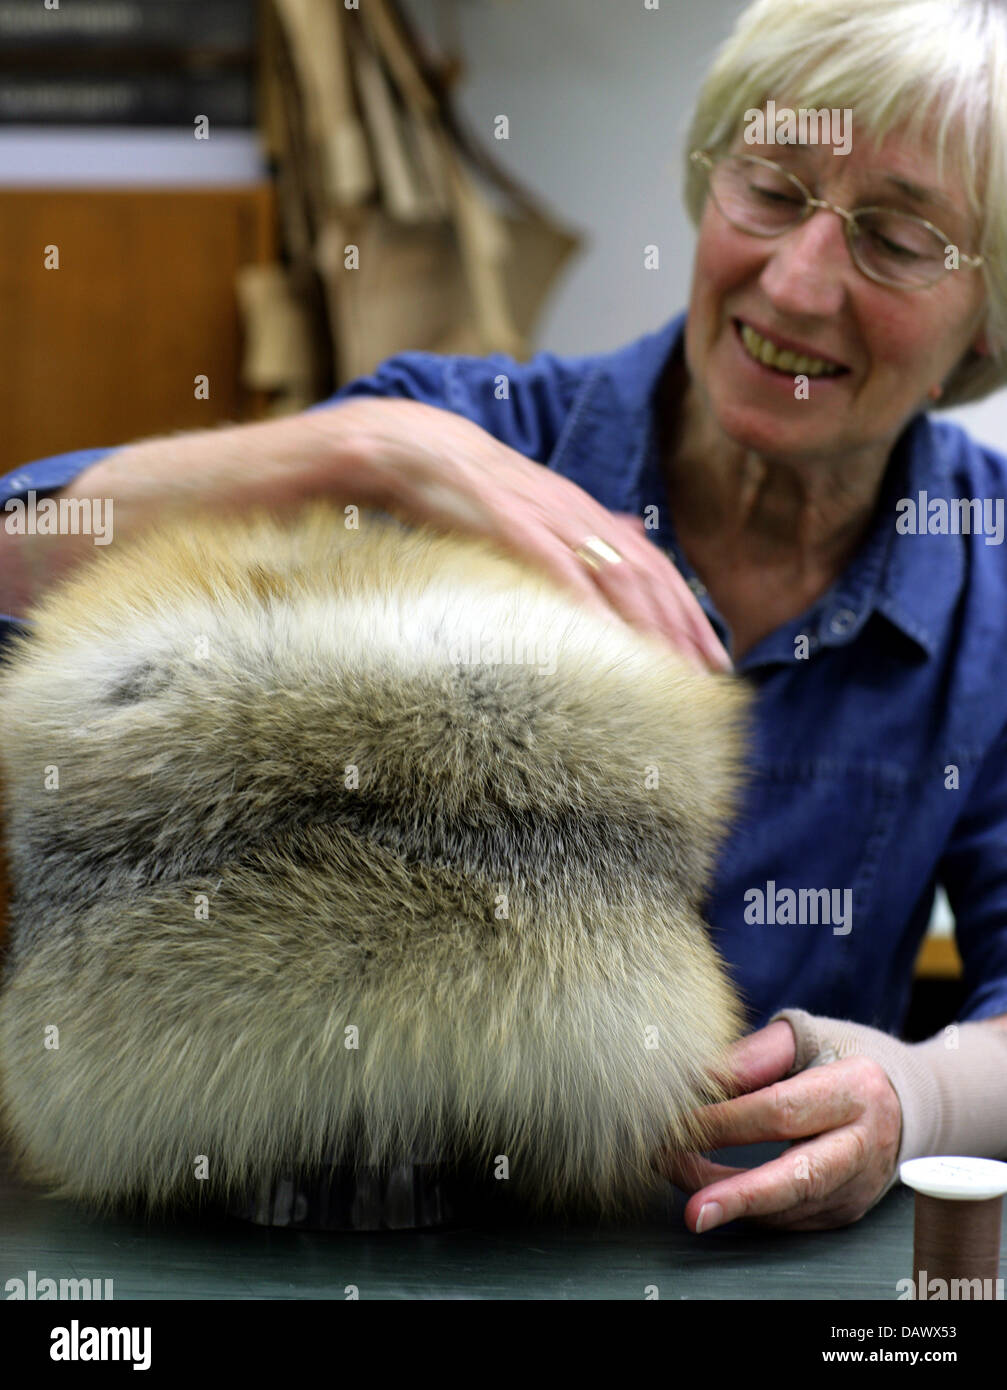 A female employee works on a fox fur hat at the workshop of 'Slupinski Pelzmoden', a fur fashion producer on posh shopping street 'Koenigsallee' in Duesseldorf, Germany, 12 January 2007. Slupinski brothers design and produce single pieces for exclusive global customers. Besides their Duesseldorf shop they operate a branch in Swiss winter sports resort Saint Moritz. Photo: Rolf Venn Stock Photo